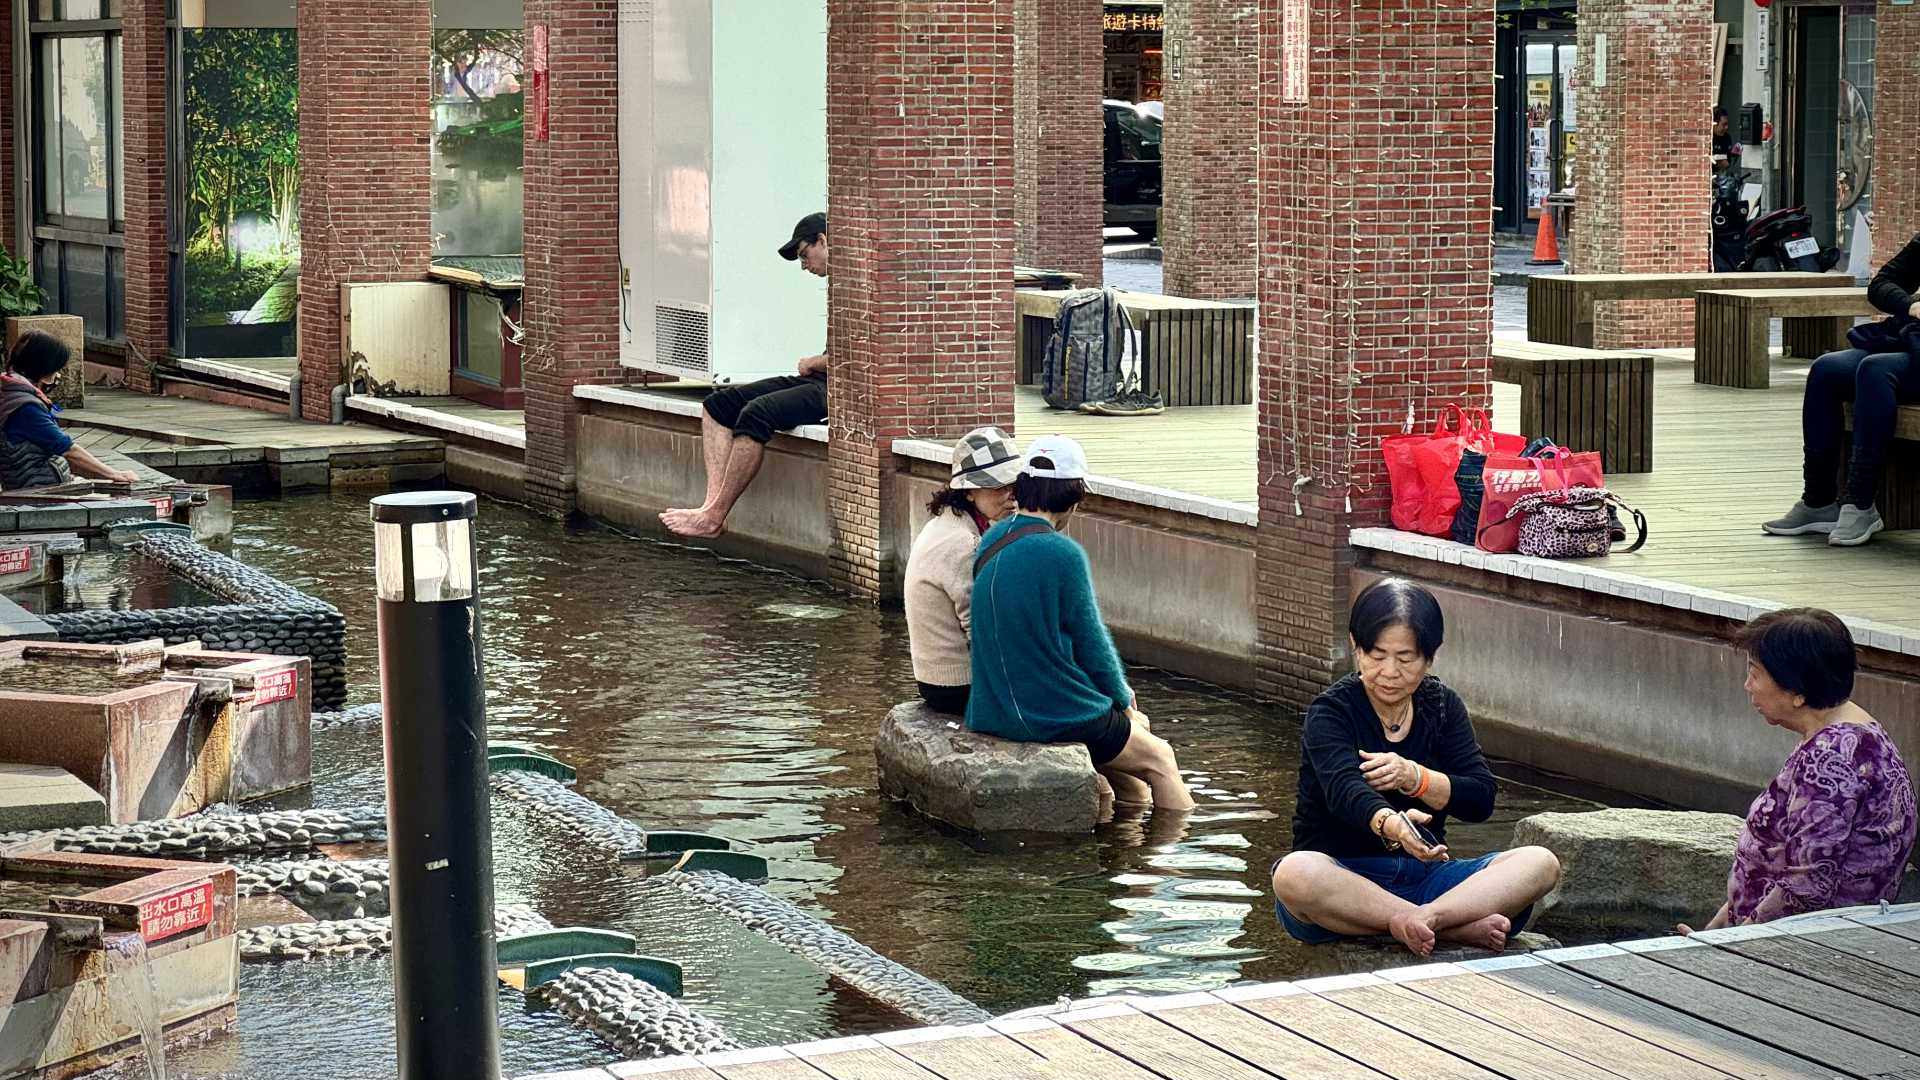 Six people sitting around a public hot-spring. Half of them have their legs in the hot water.